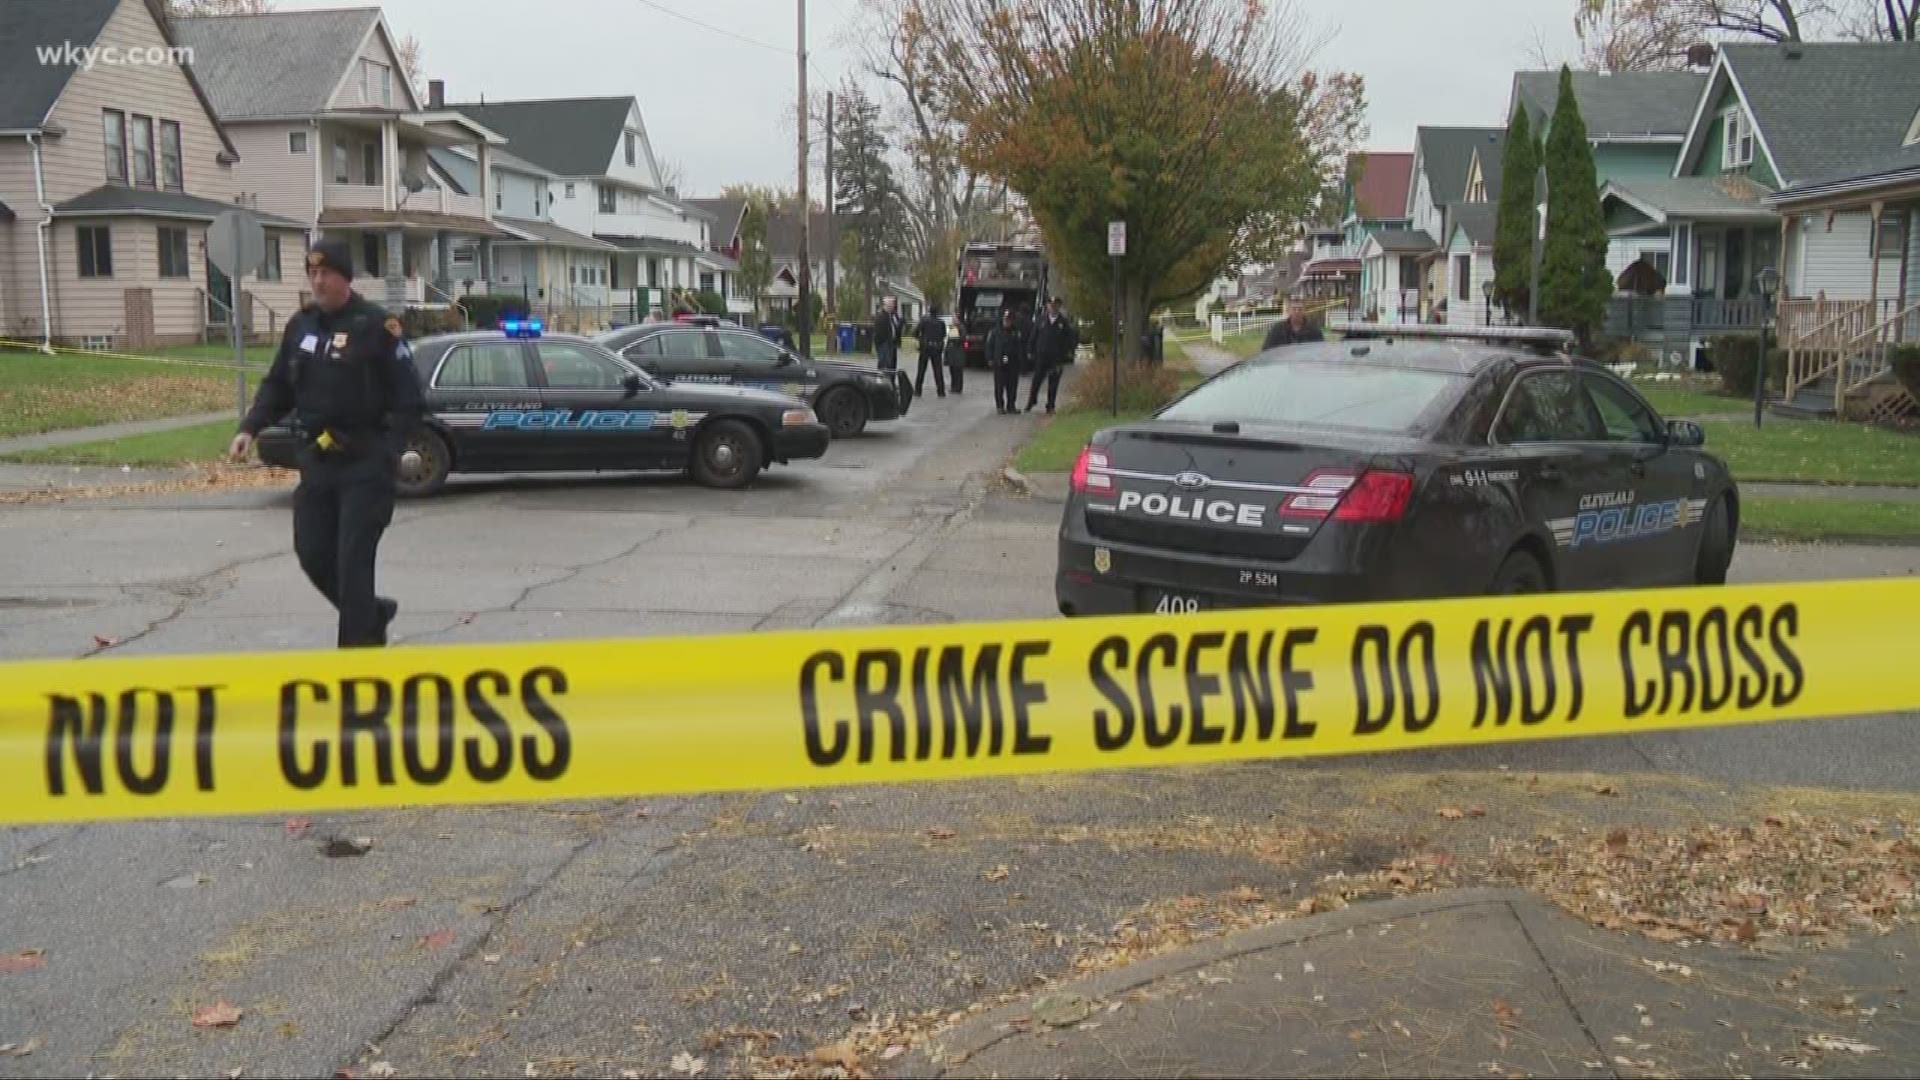 Cleveland sanitation workers shot and killed on city's east side; suspect at large